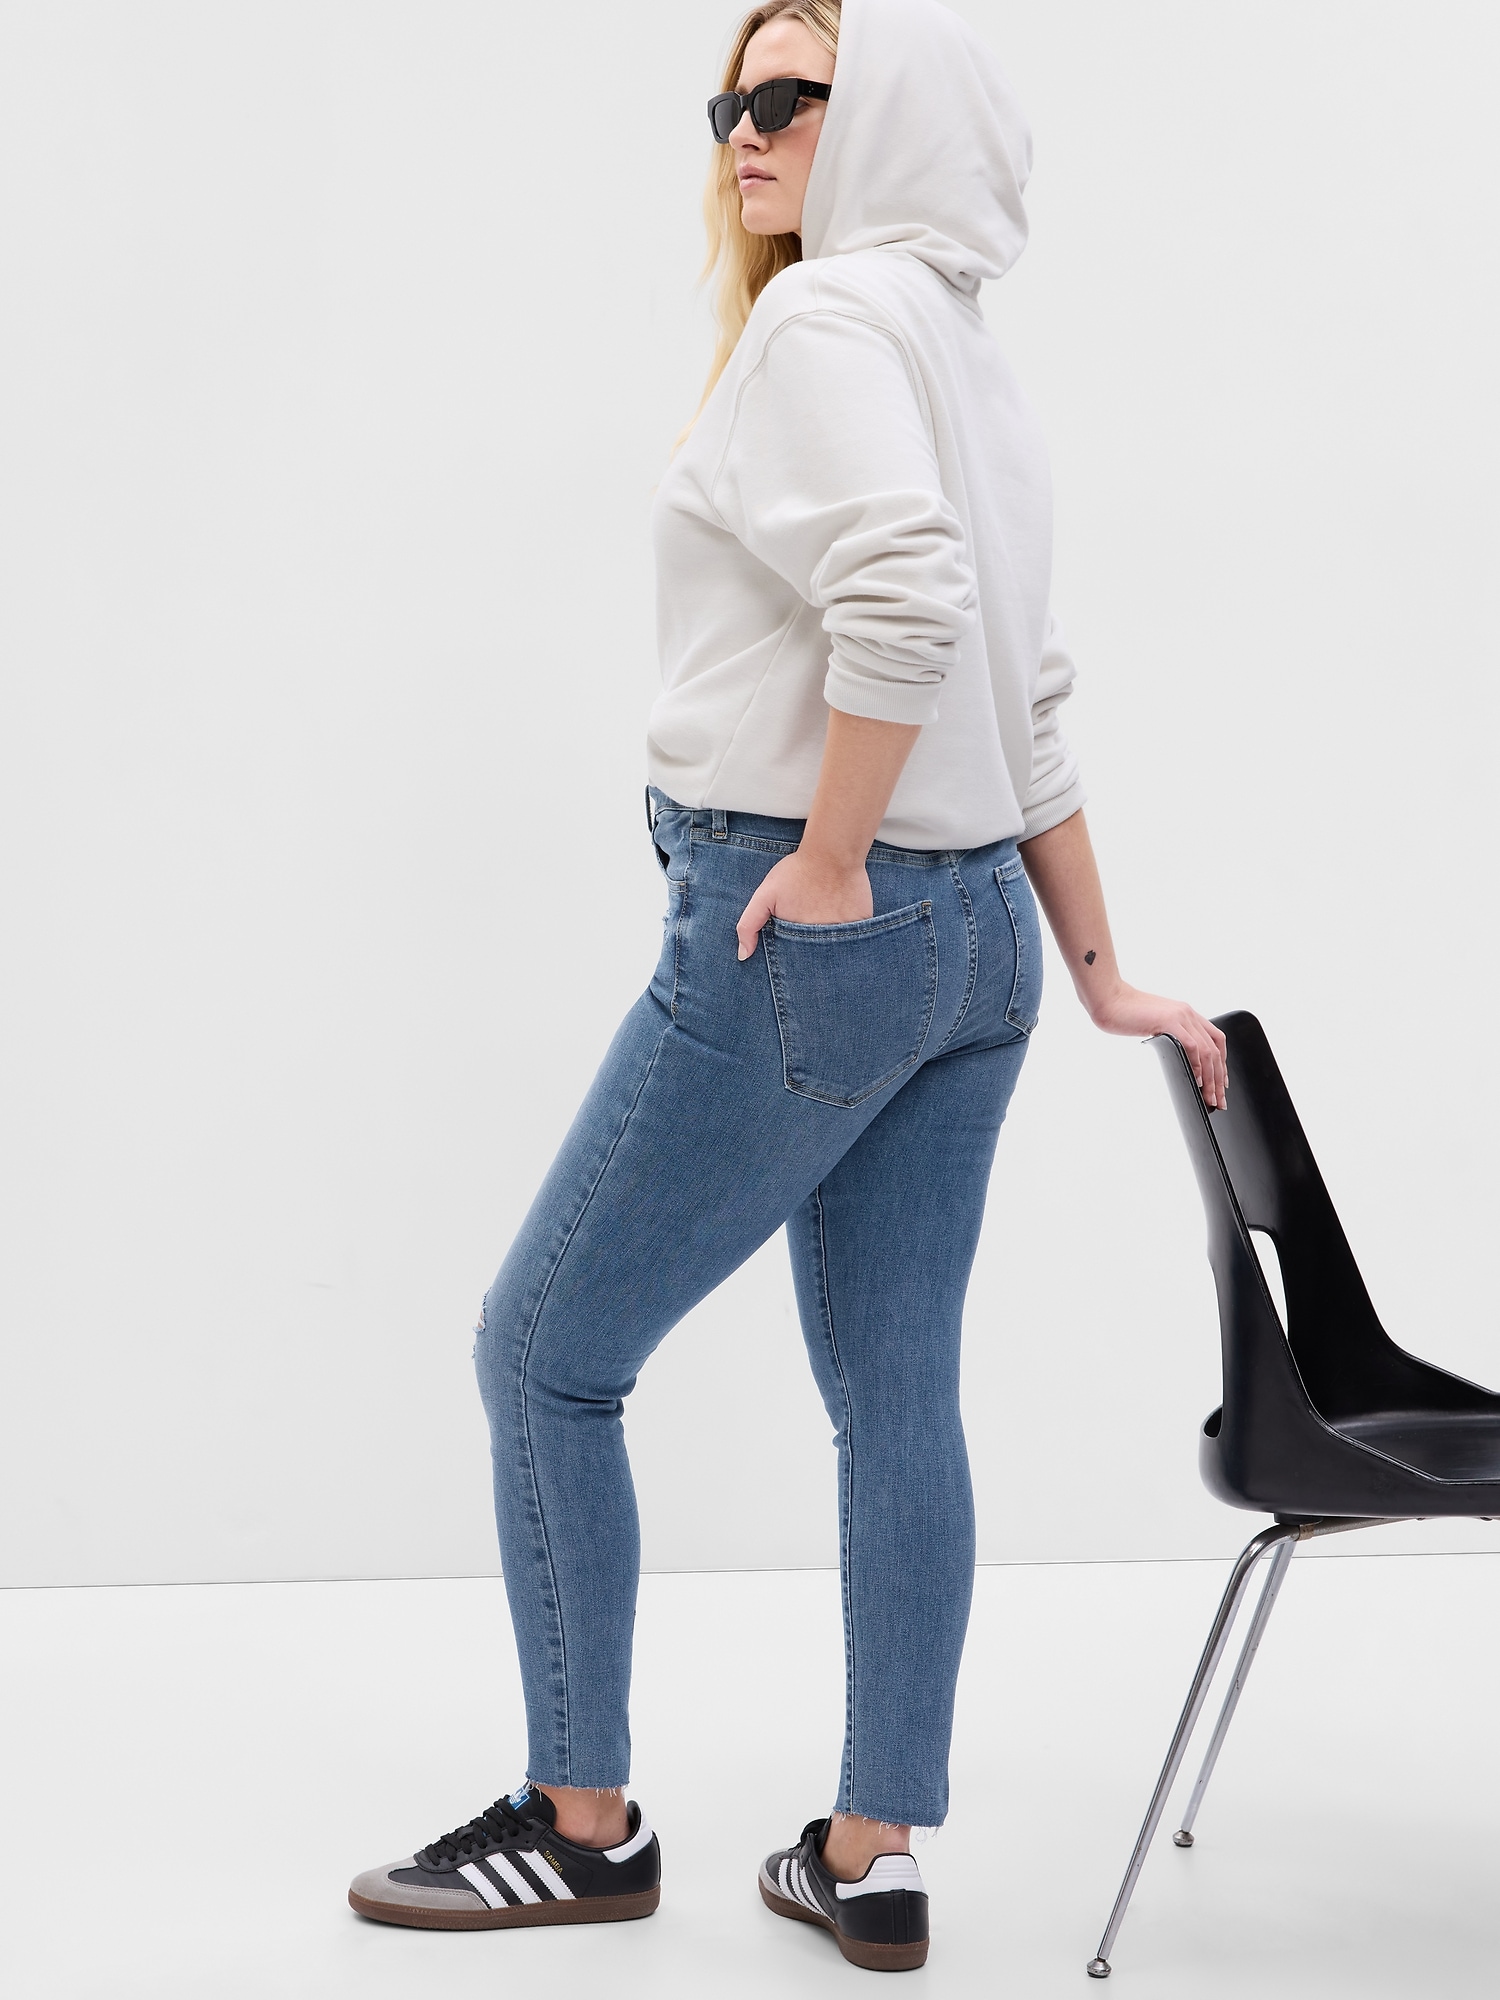 Buy Gap High Rise Destructed Ankle Jeggings from the Gap online shop